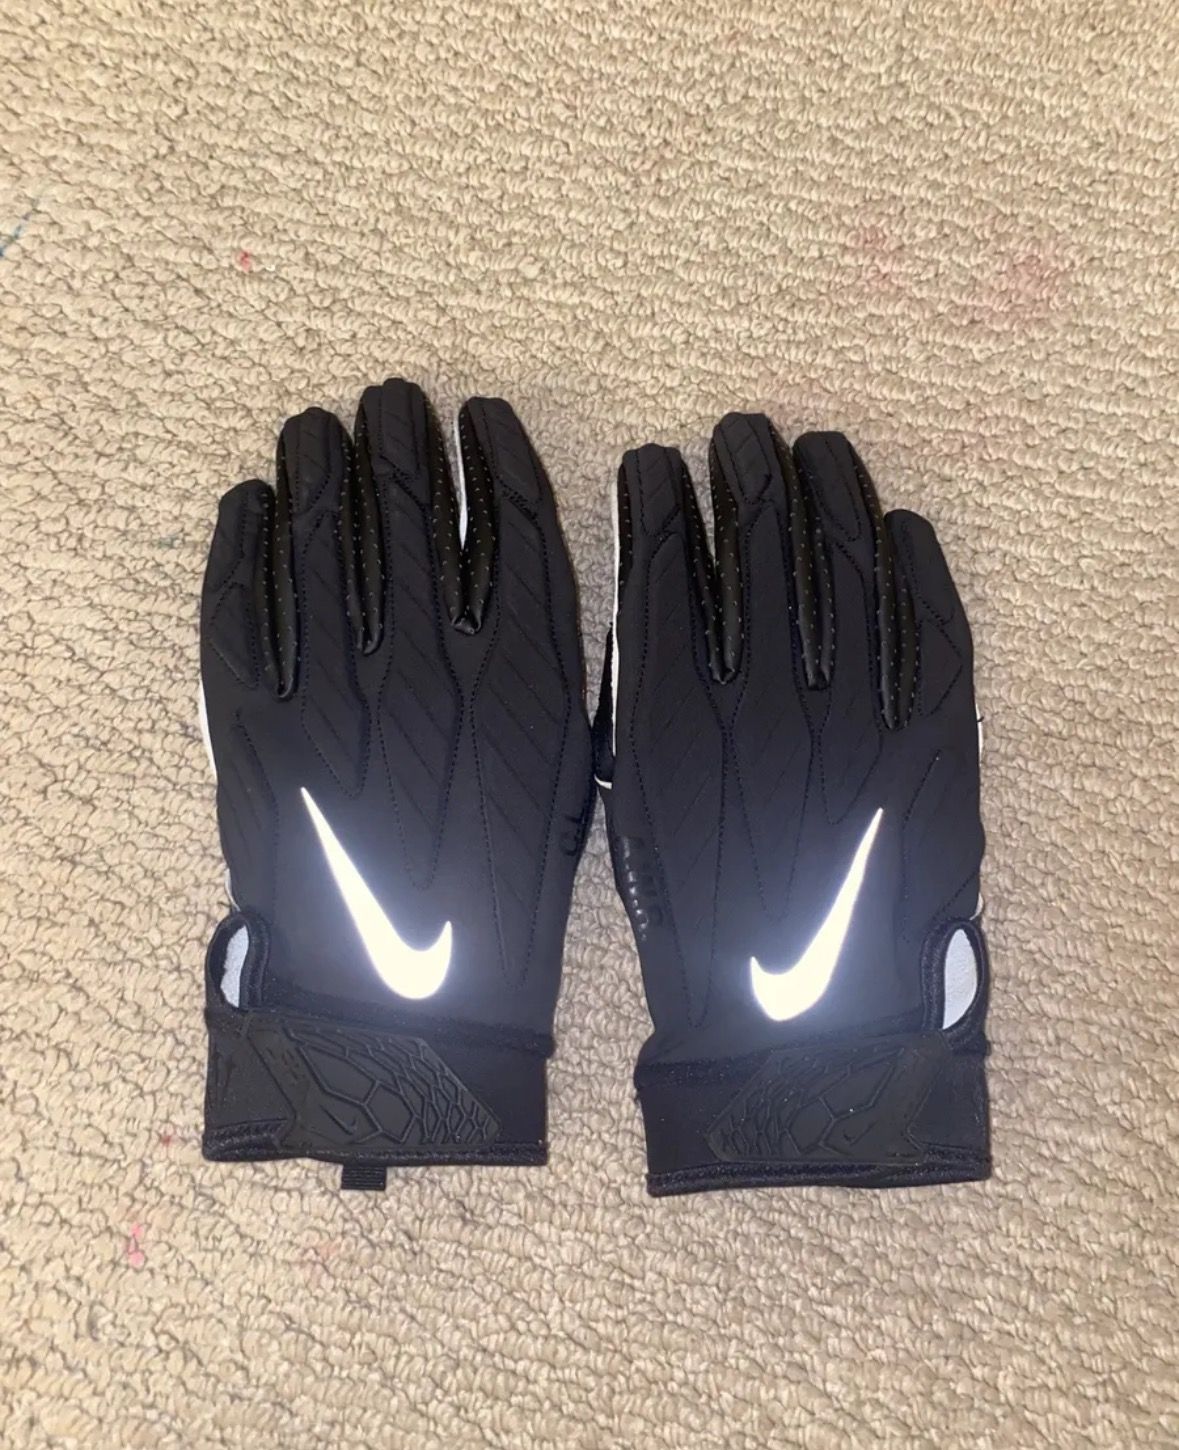 Pre-owned Drake X Nike Nocta Gloves Size Large Lightly Used In Black